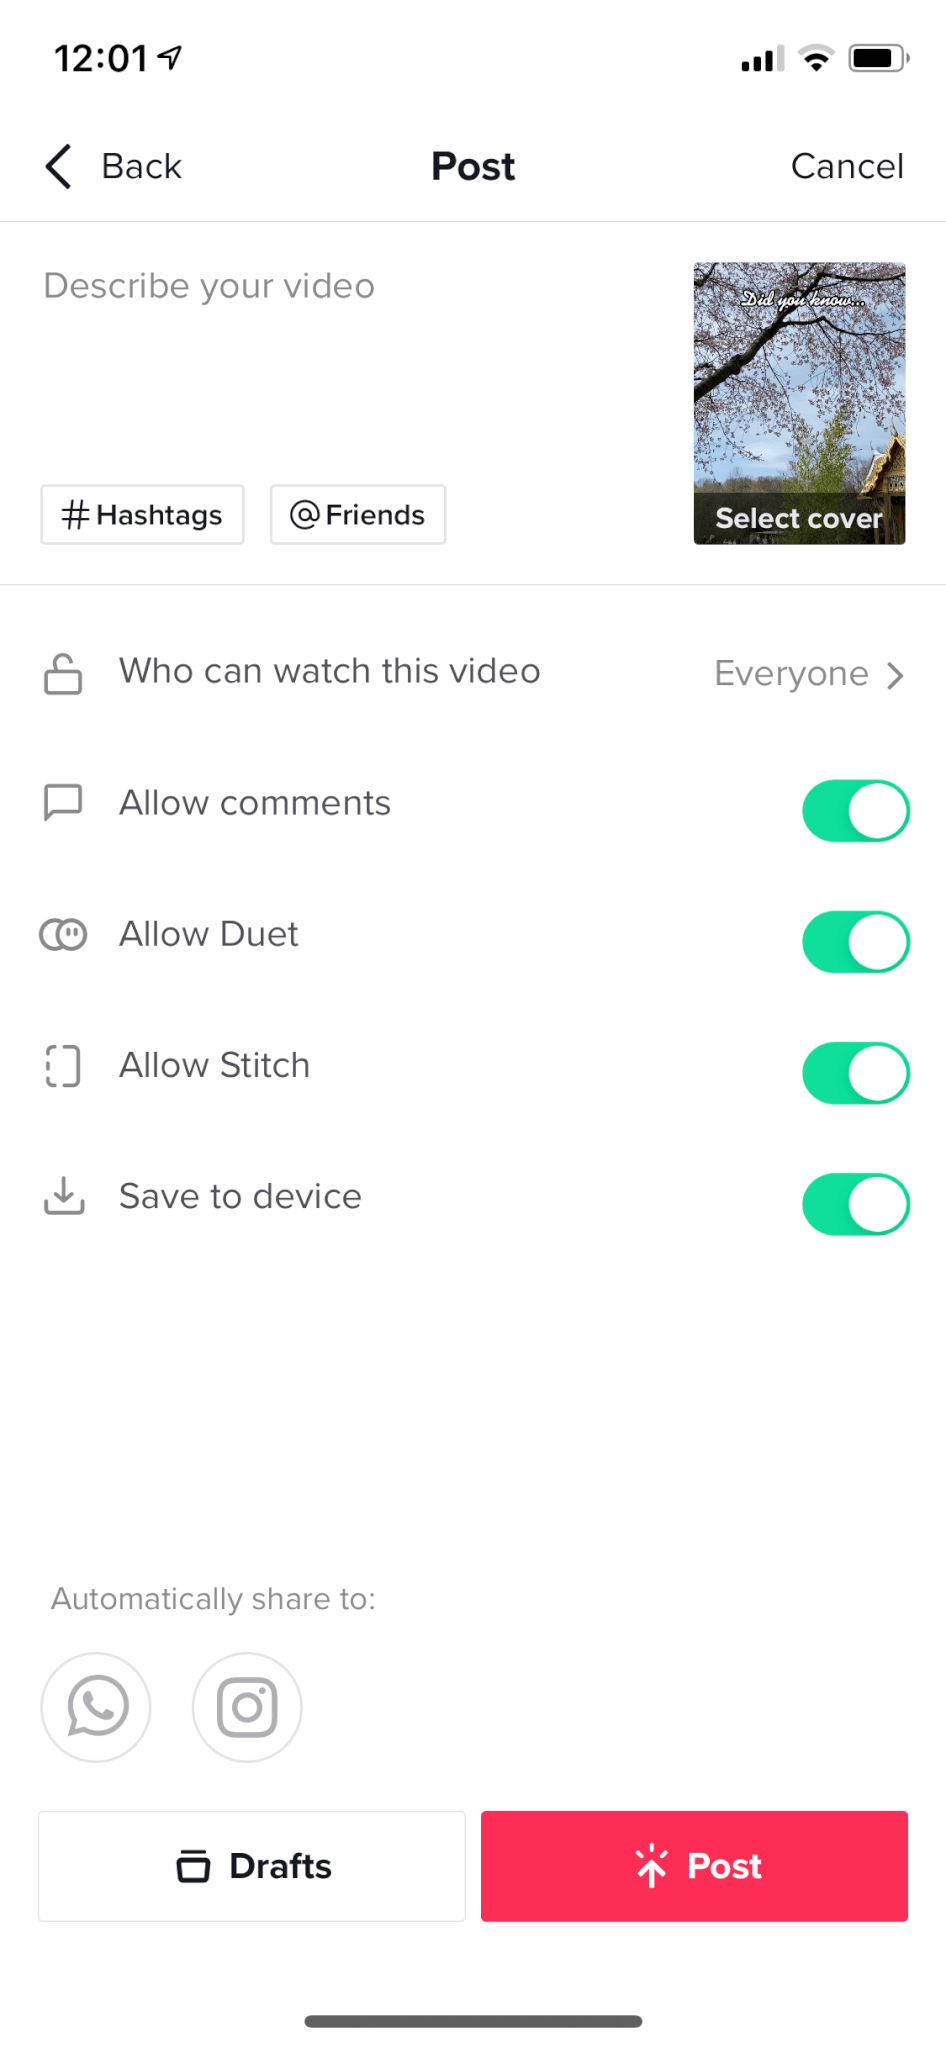 download tiktok videos without watermark iphone